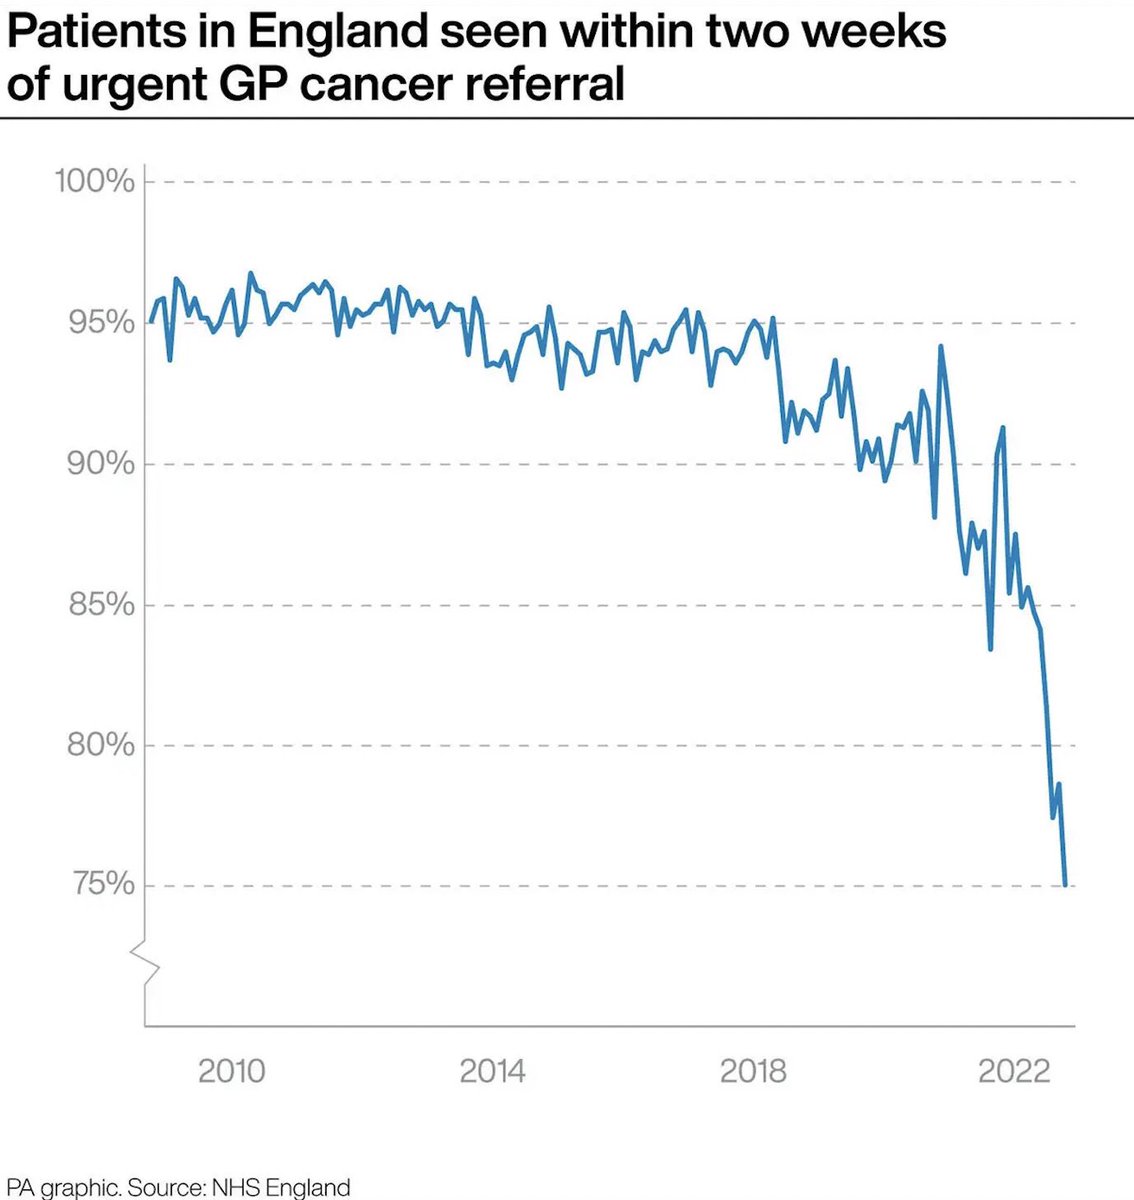 @AllisonPearson @BBCr4today The cancer backlog is well documented and it is clear we have too few radiologists & doctors

The NHS is short of nearly 2,000 radiologists and 200 clinical oncologist

Report show those shortages could hit 6,000 and 700 by 2030.

#NHScrisis
#Radio4Today 

rcr.ac.uk/posts/nhs-will…